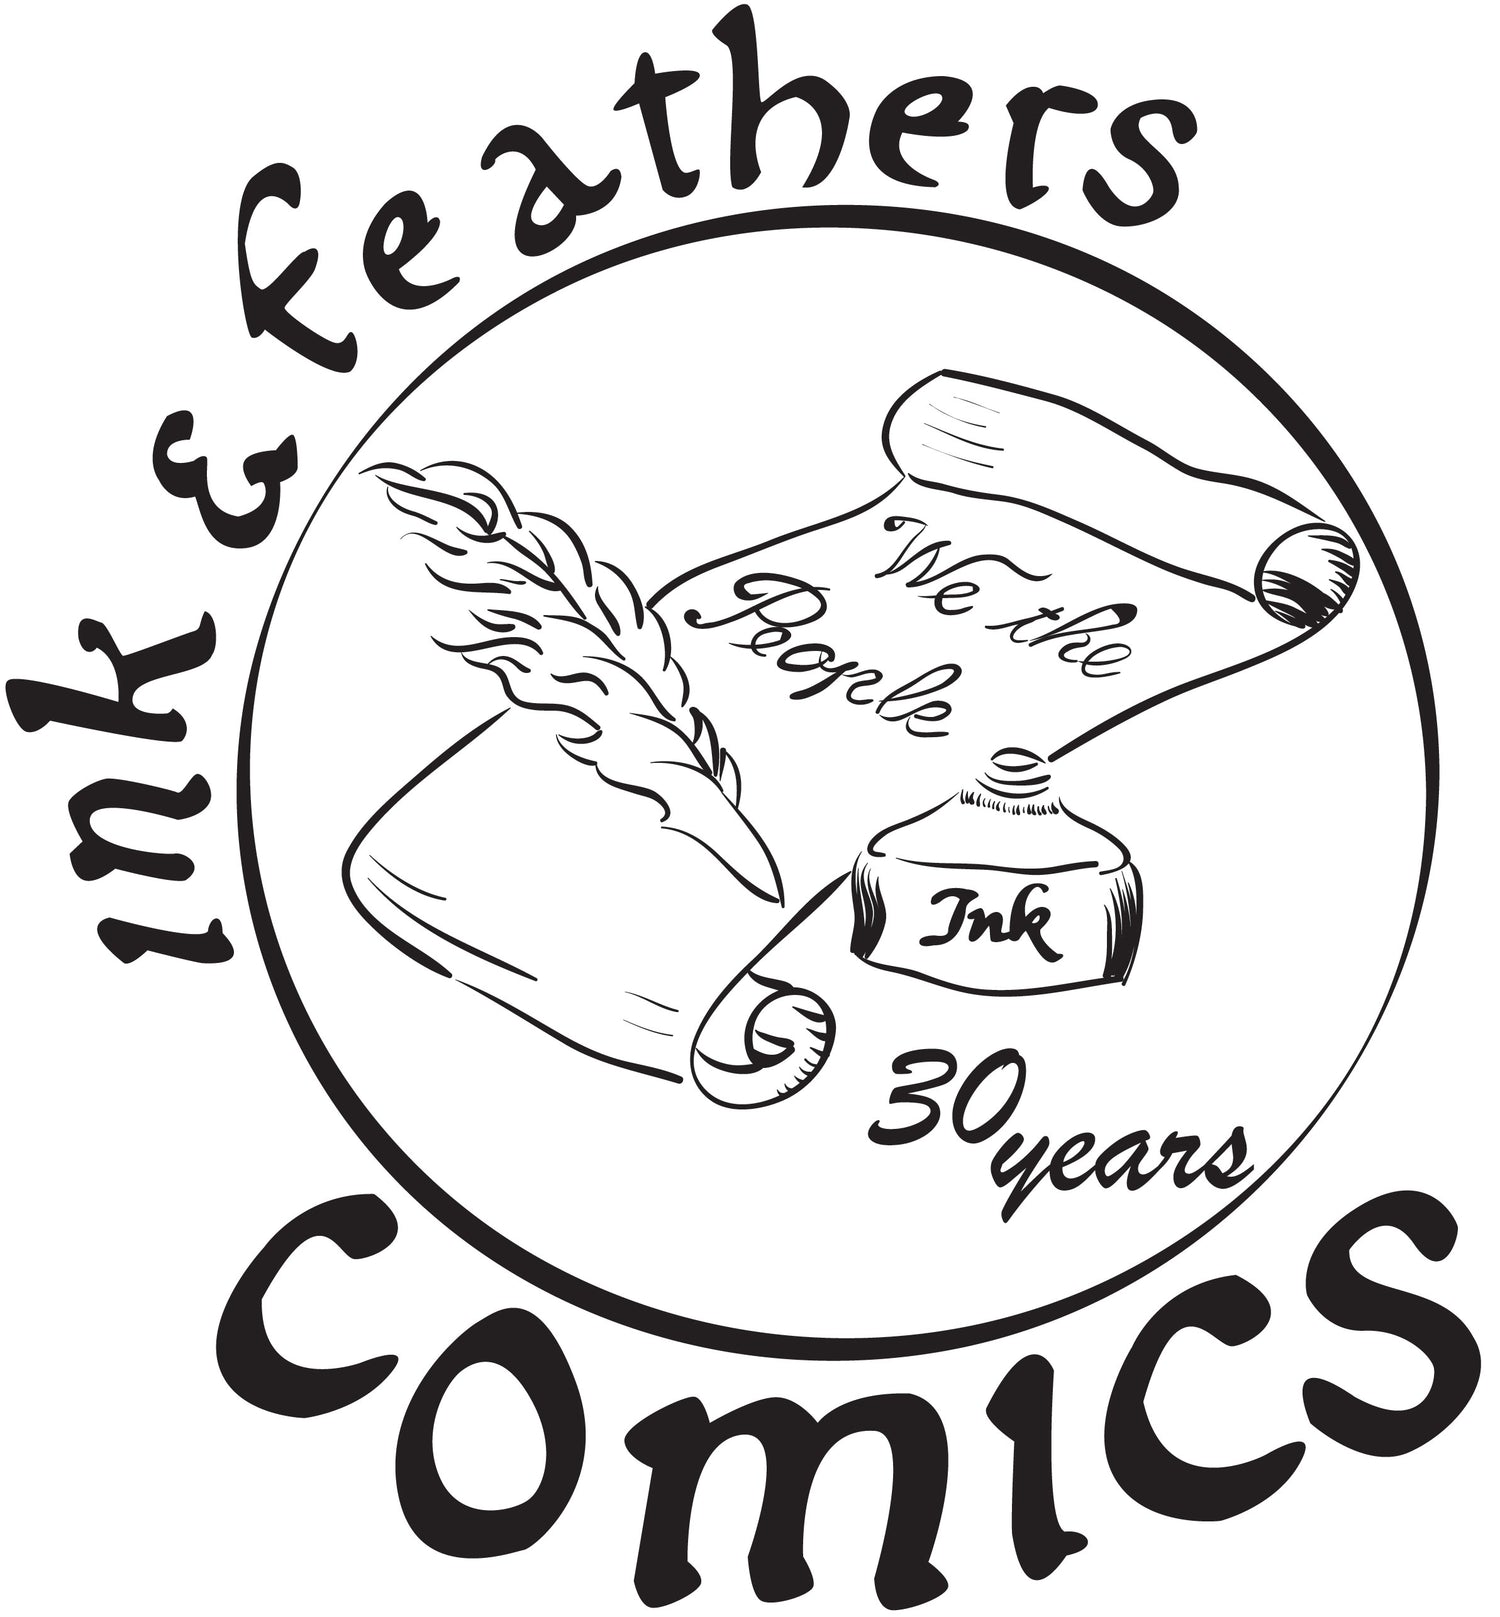 Ink and Feathers Comics